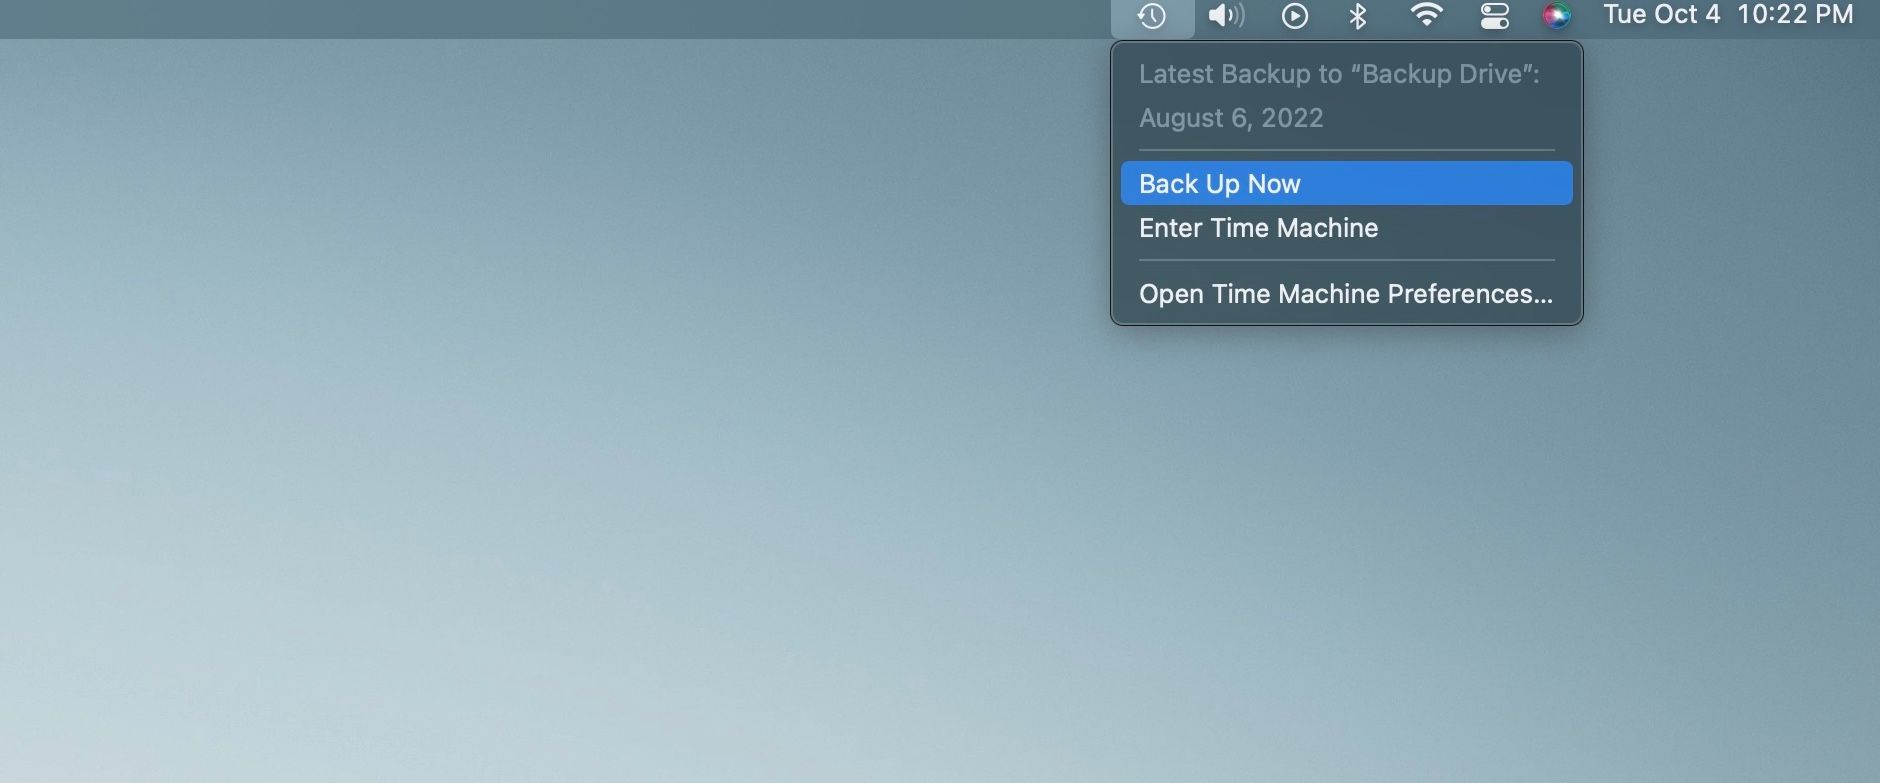 Back up now option in the menu bar